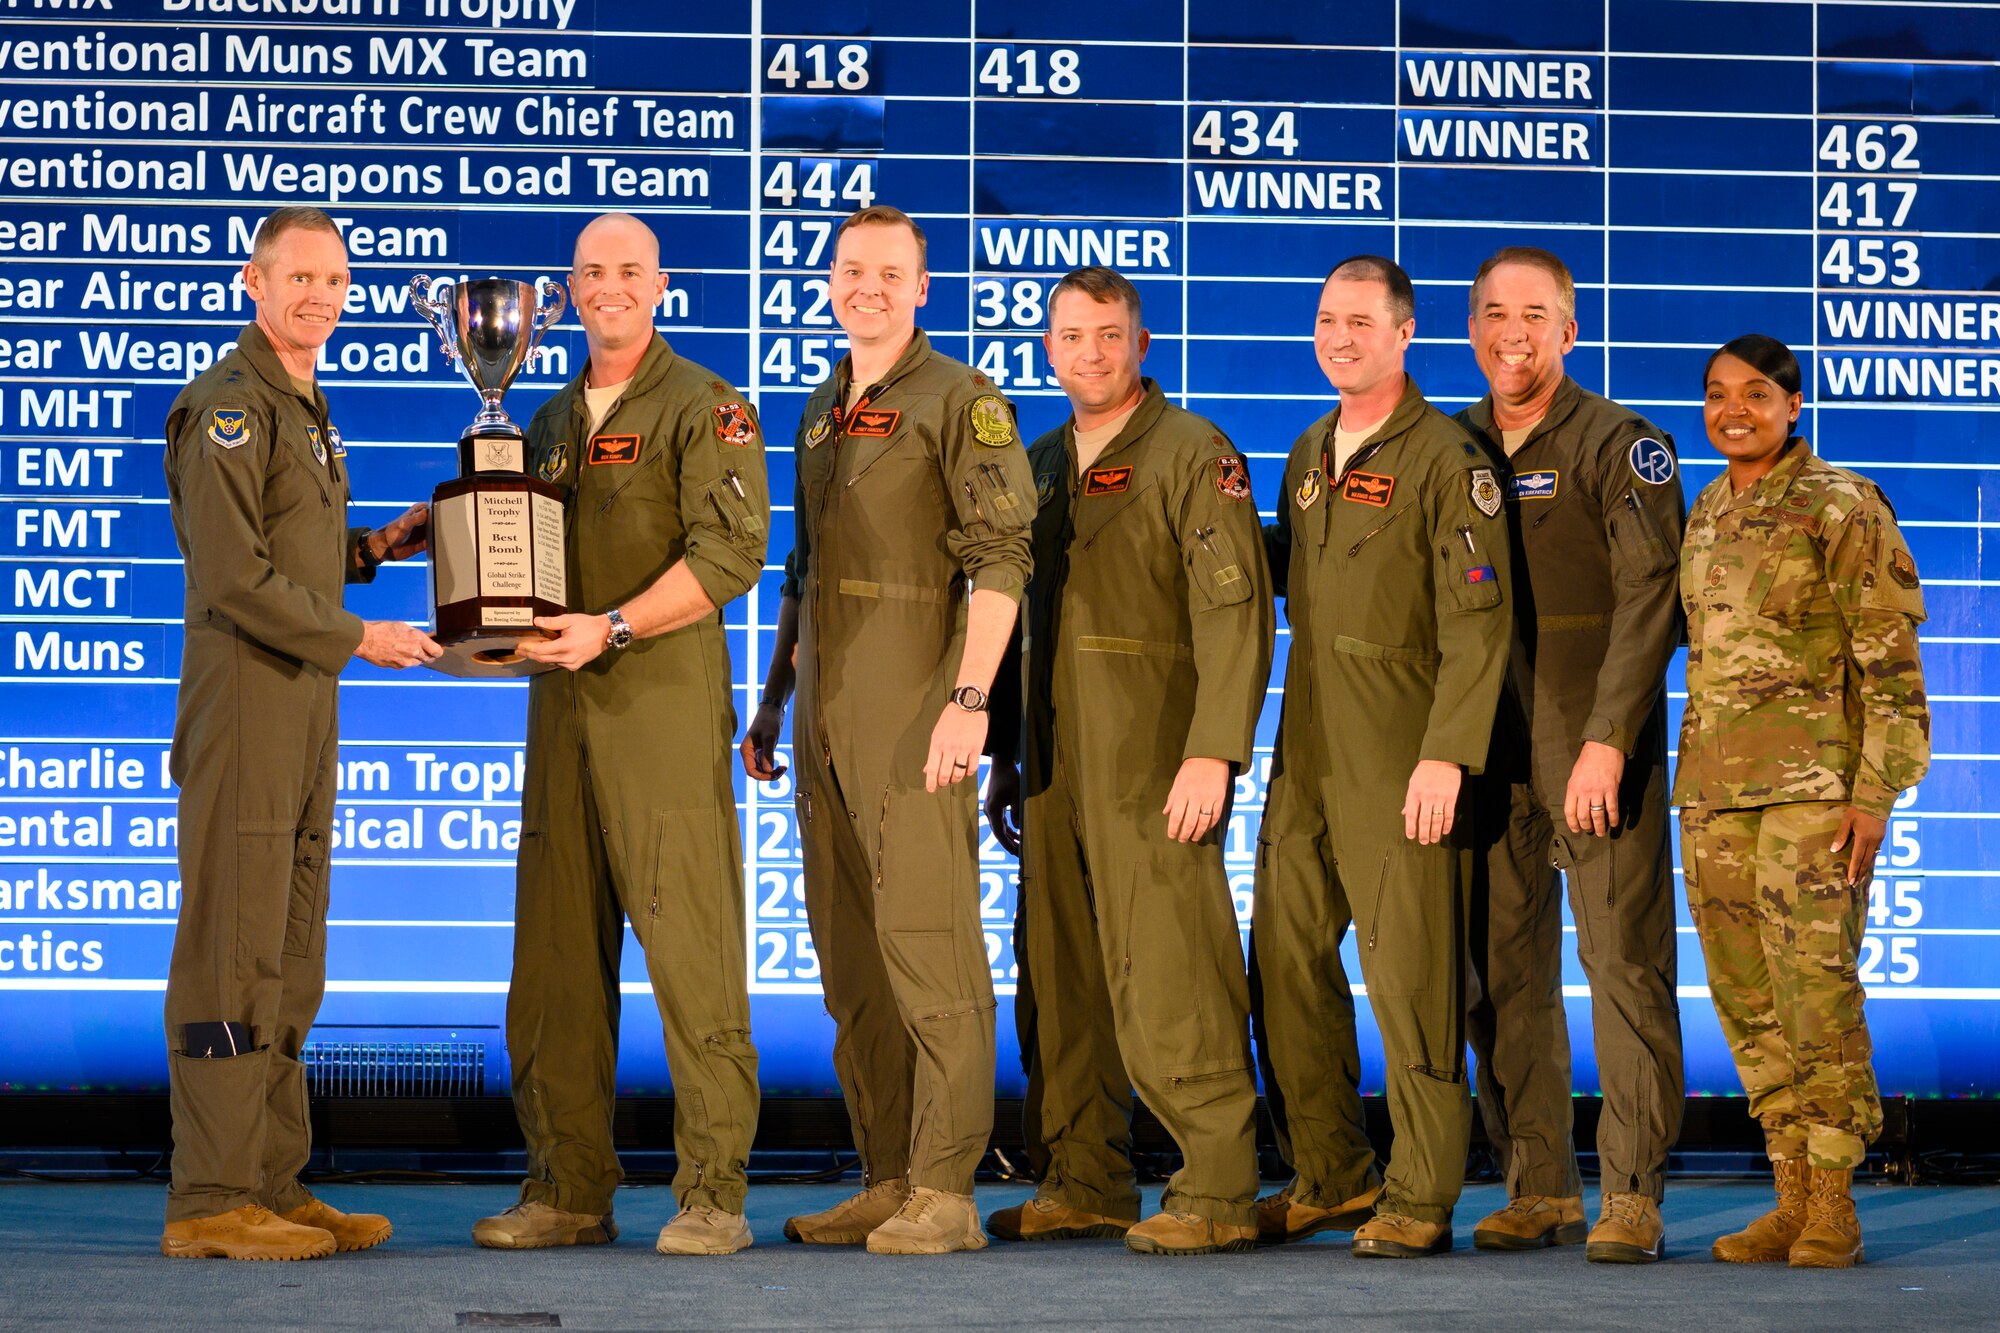 343rd Bomb Squadron posing with Mitchell Award.